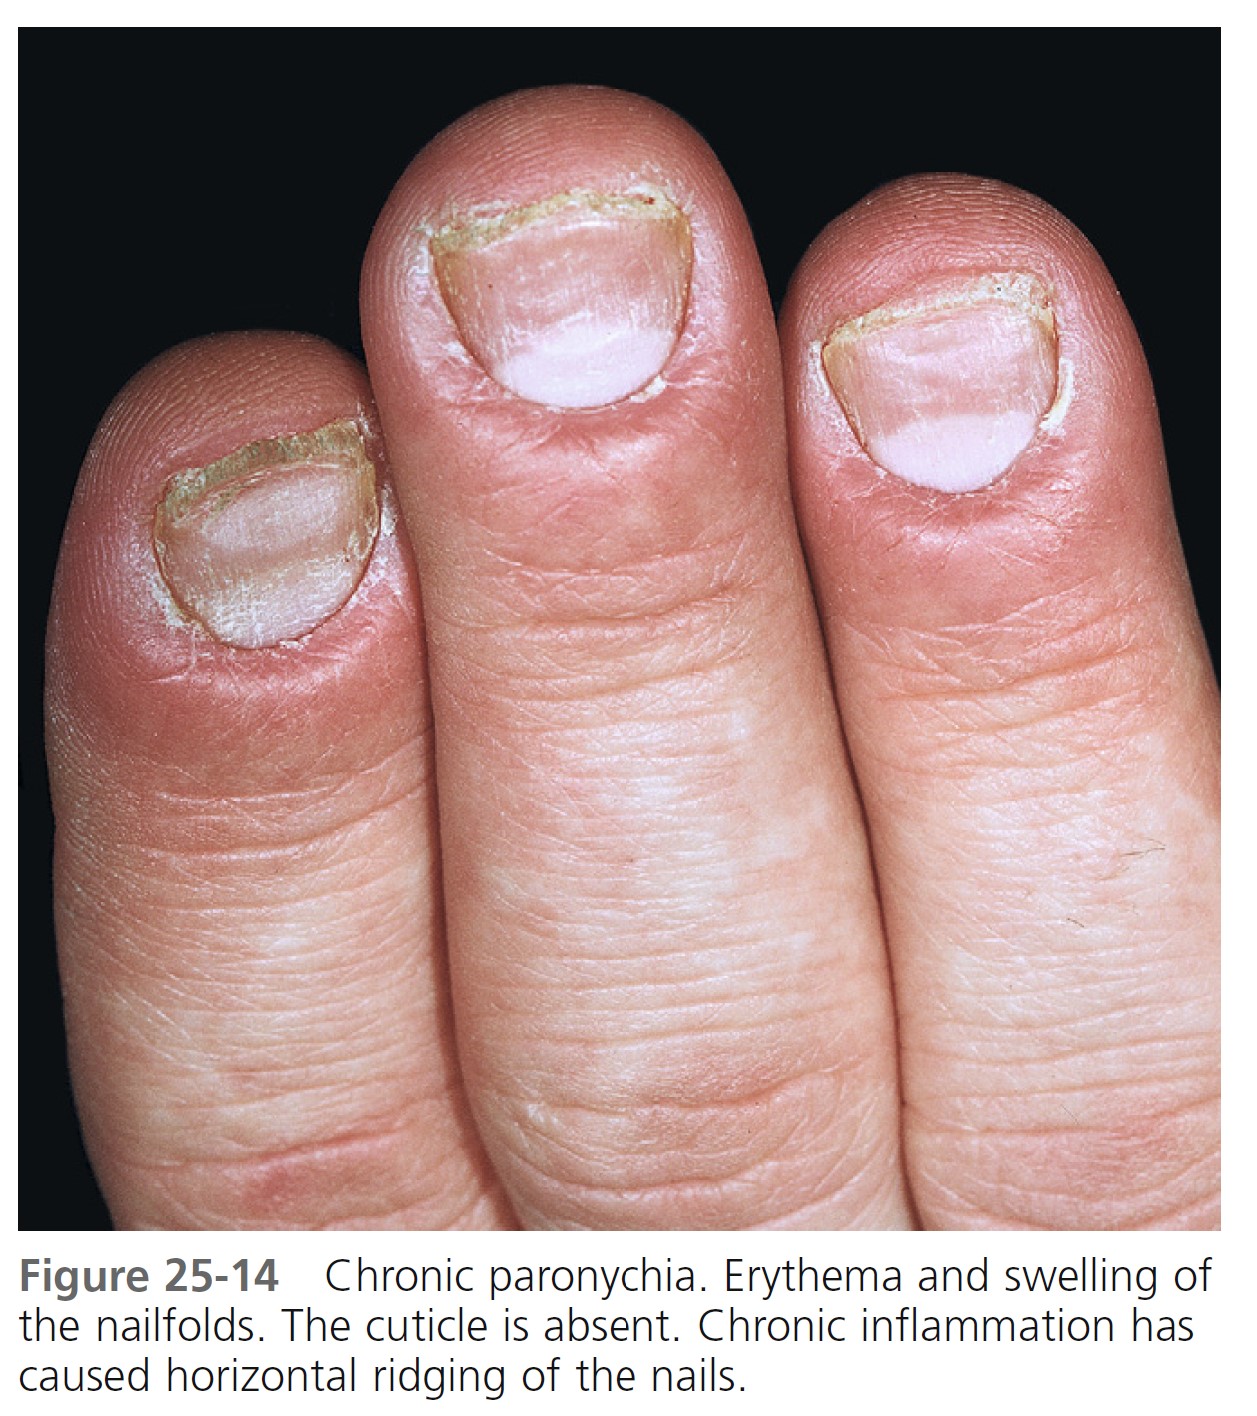 Green nail syndrome associated with military footwear - Cho - 2008 -  Clinical and Experimental Dermatology - Wiley Online Library